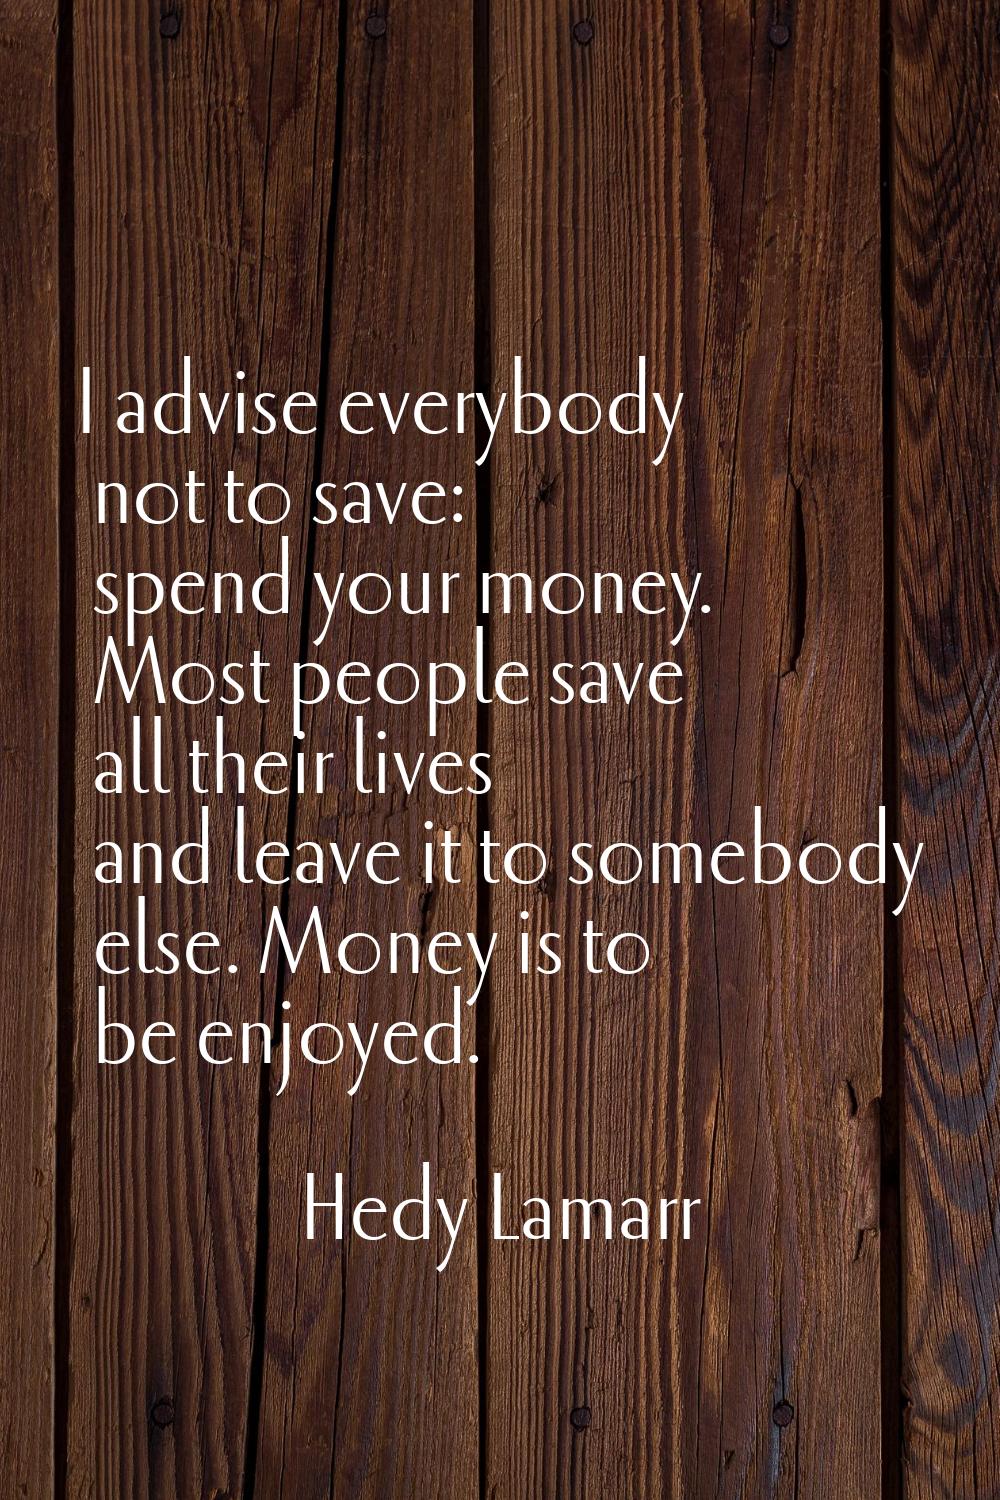 I advise everybody not to save: spend your money. Most people save all their lives and leave it to 